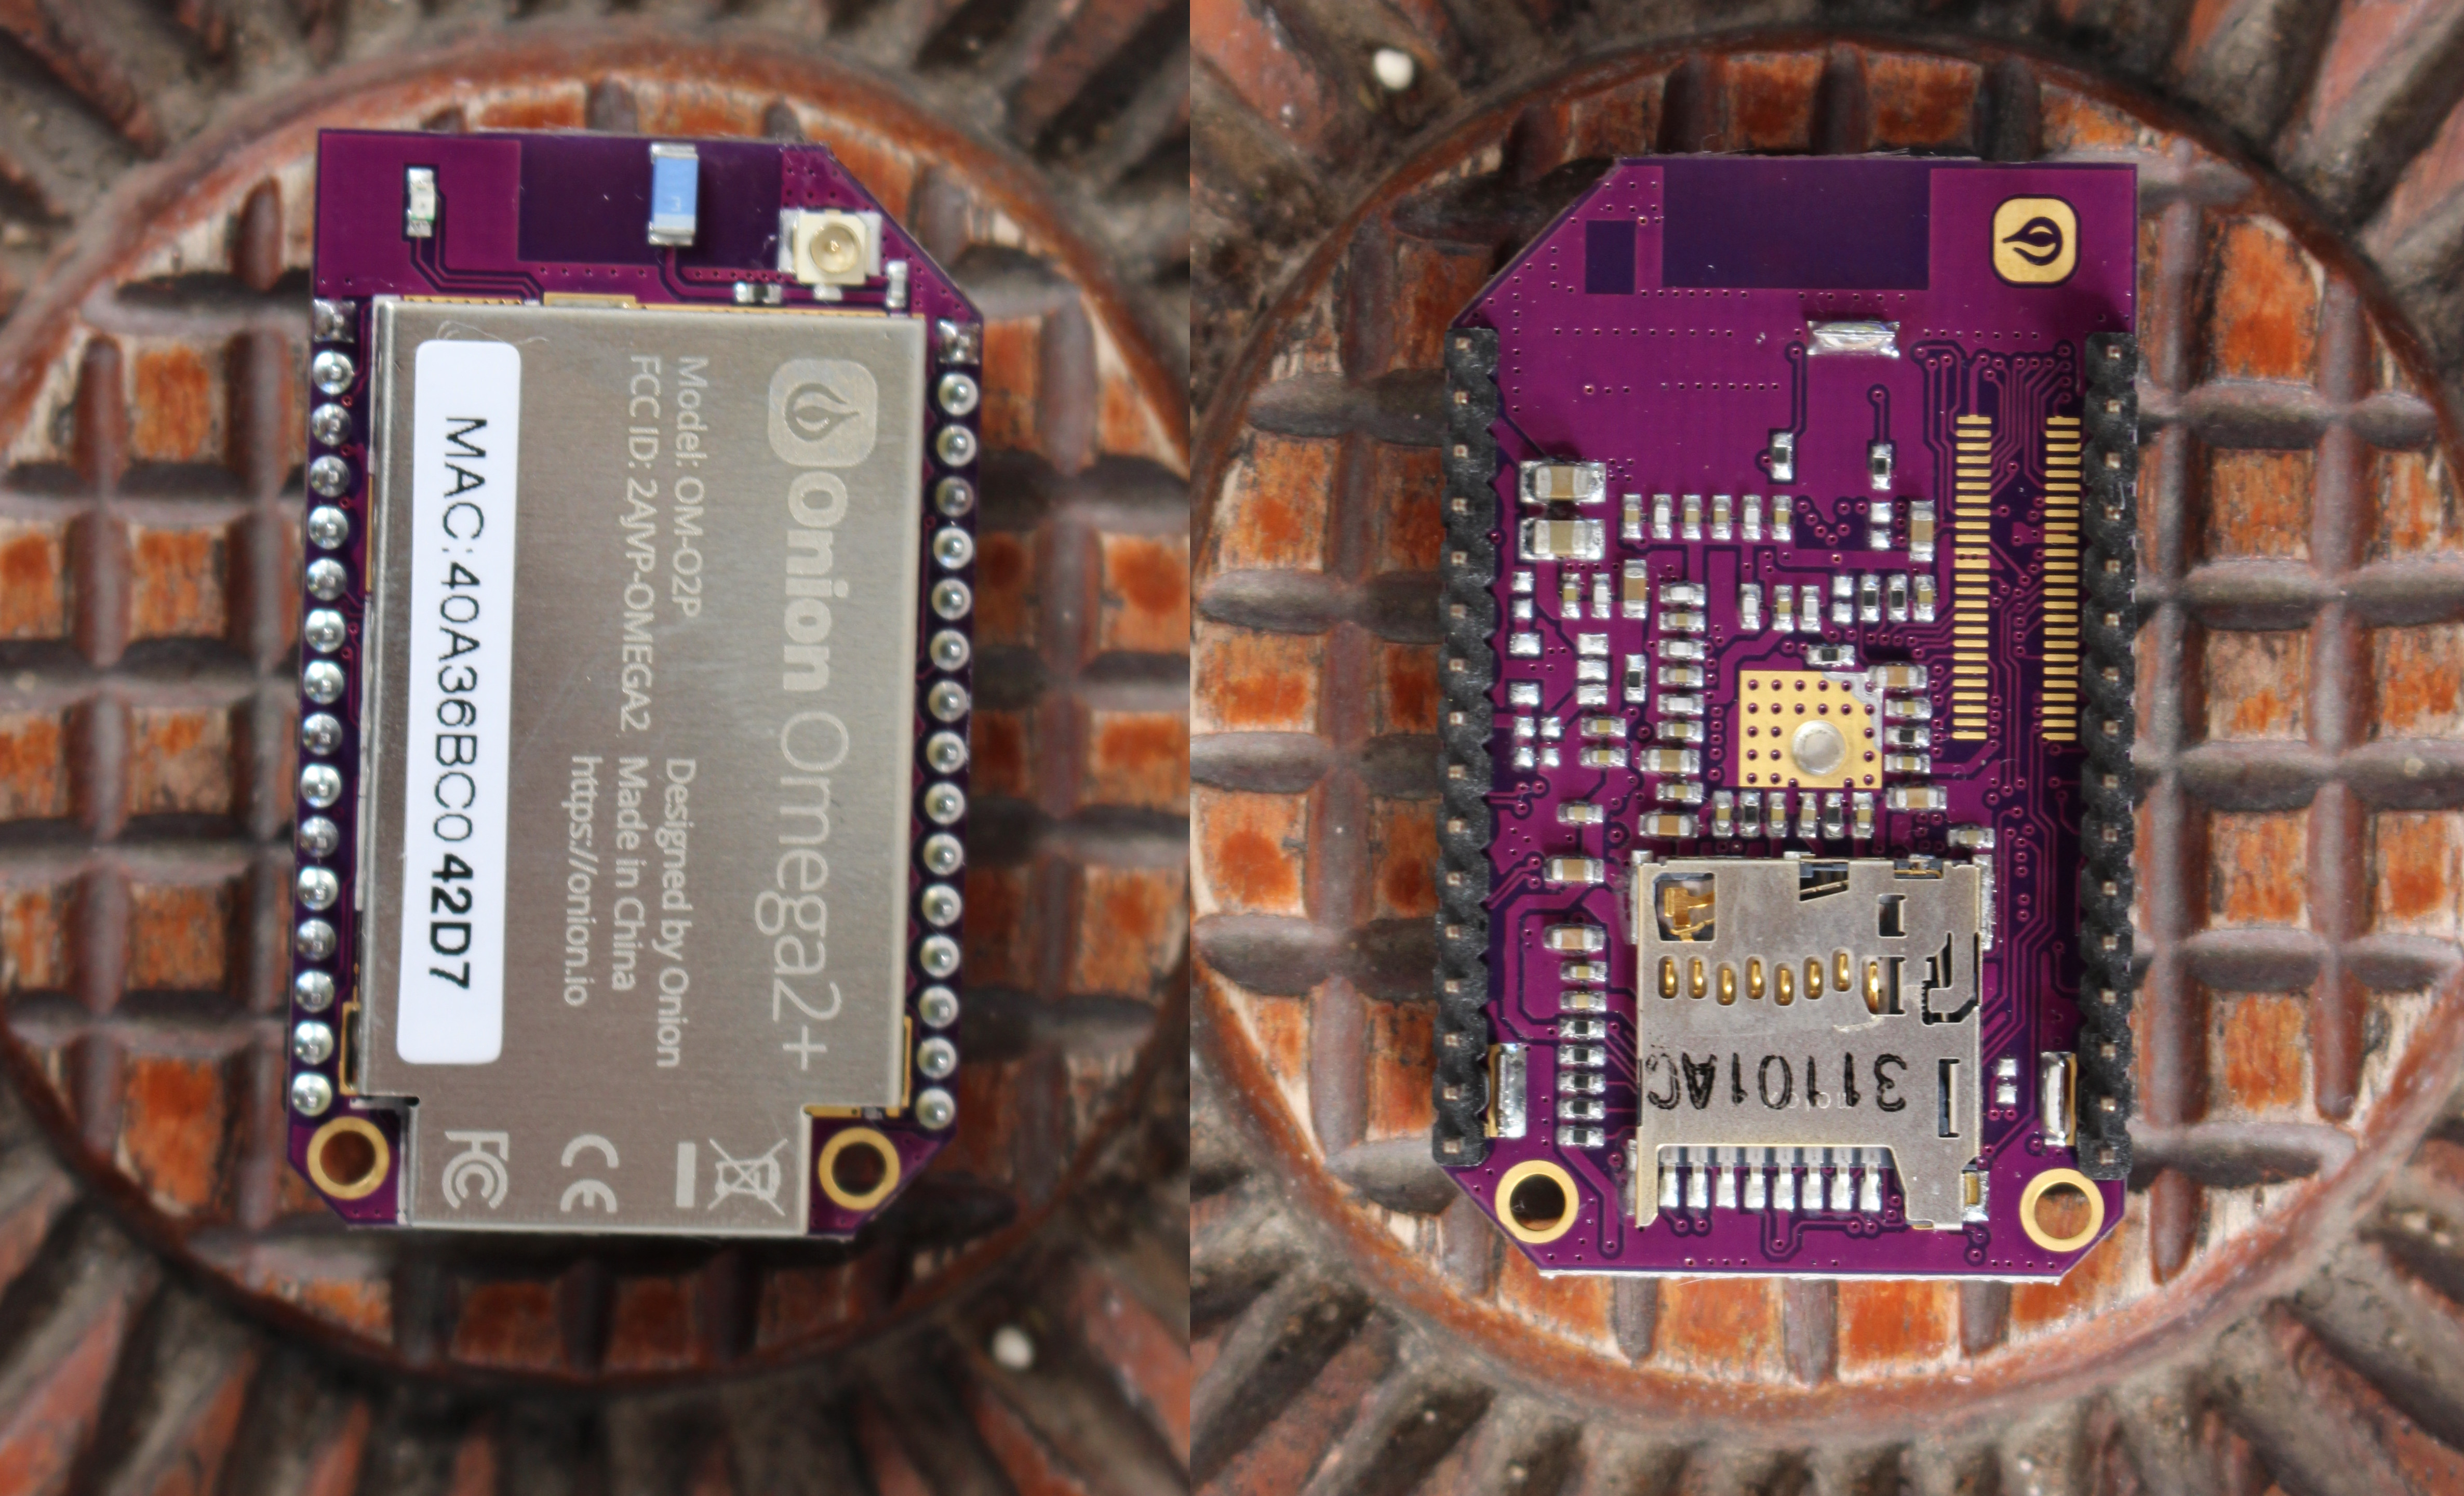 Omega2: $5 Linux Computer with Wi-Fi, Made for IoT by Onion — Kickstarter